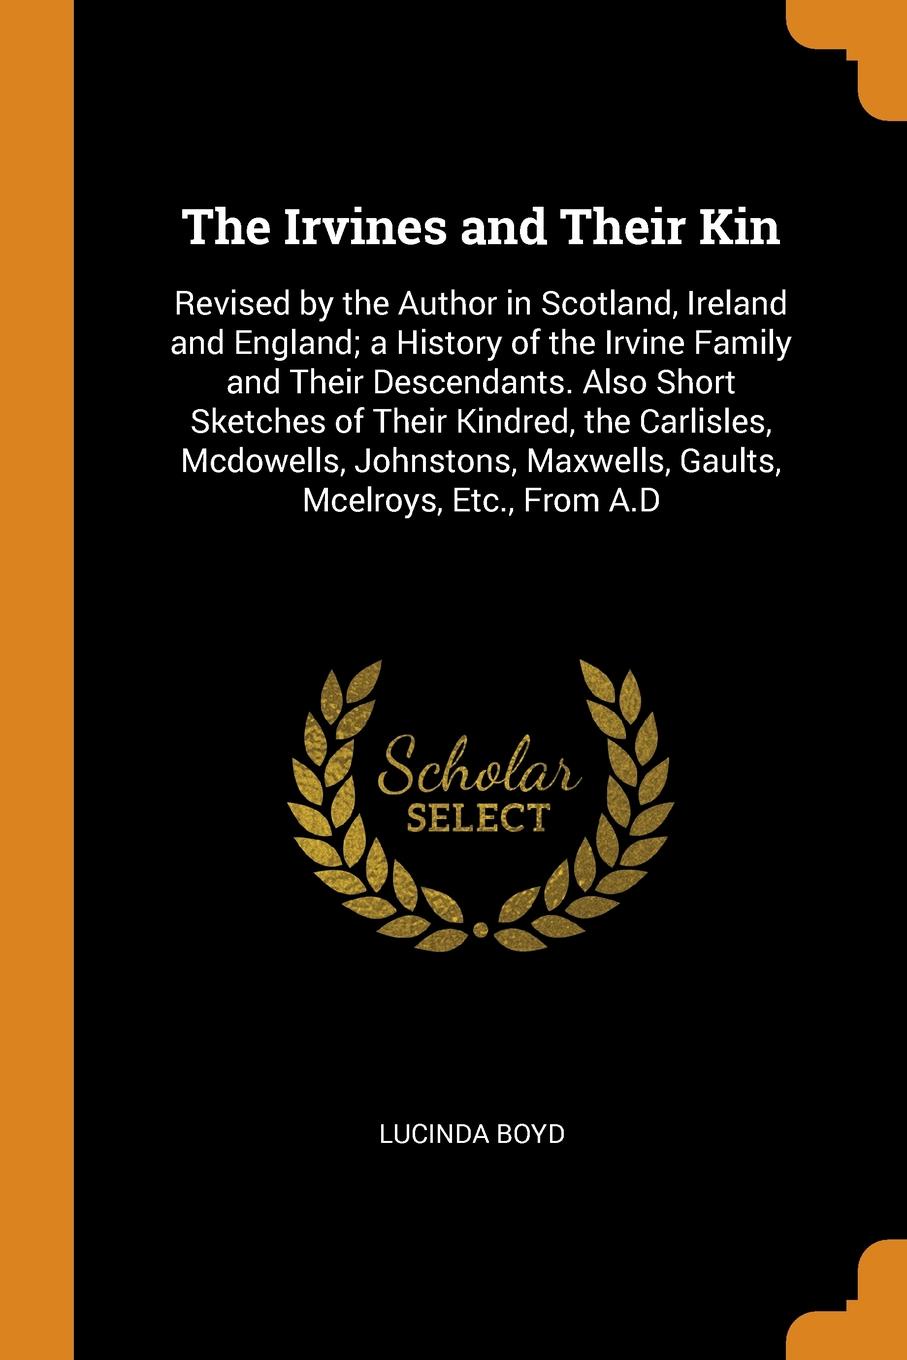 The Irvines and Their Kin. Revised by the Author in Scotland, Ireland and England; a History of the Irvine Family and Their Descendants. Also Short Sketches of Their Kindred, the Carlisles, Mcdowells, Johnstons, Maxwells, Gaults, Mcelroys, Etc., F...